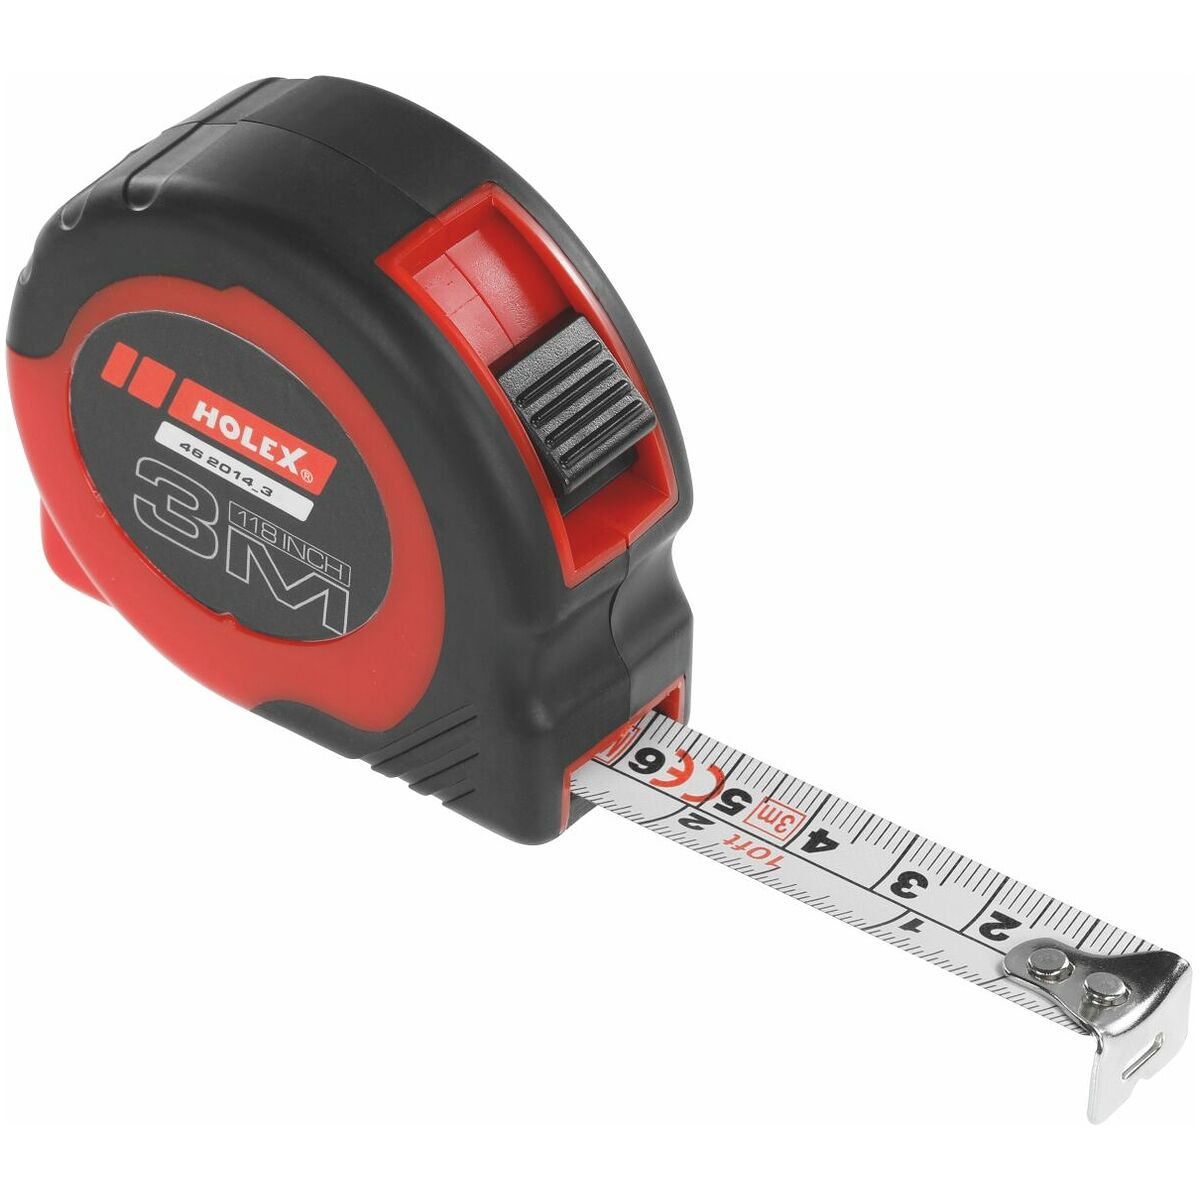 Simply buy Tape measure with mm/inch graduations